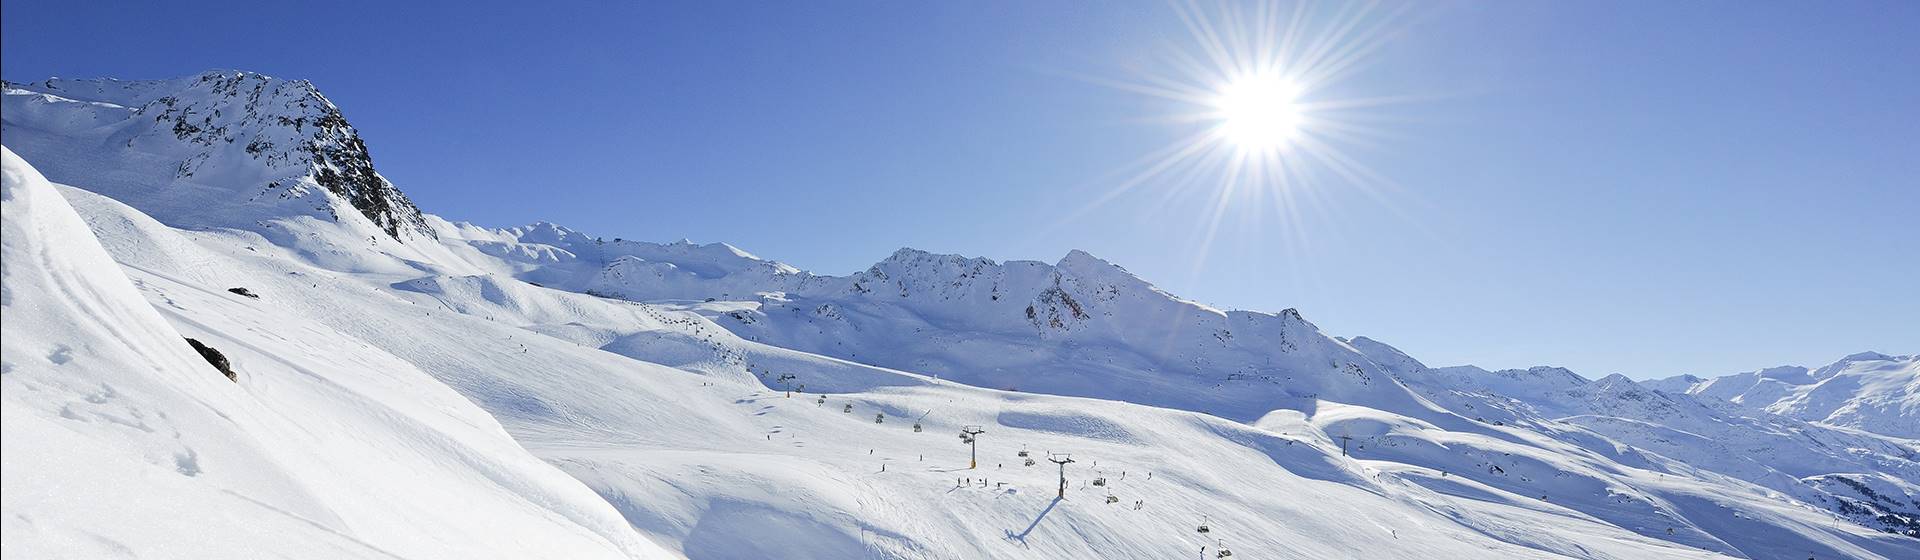 Ski area with lifts in bright sunshine